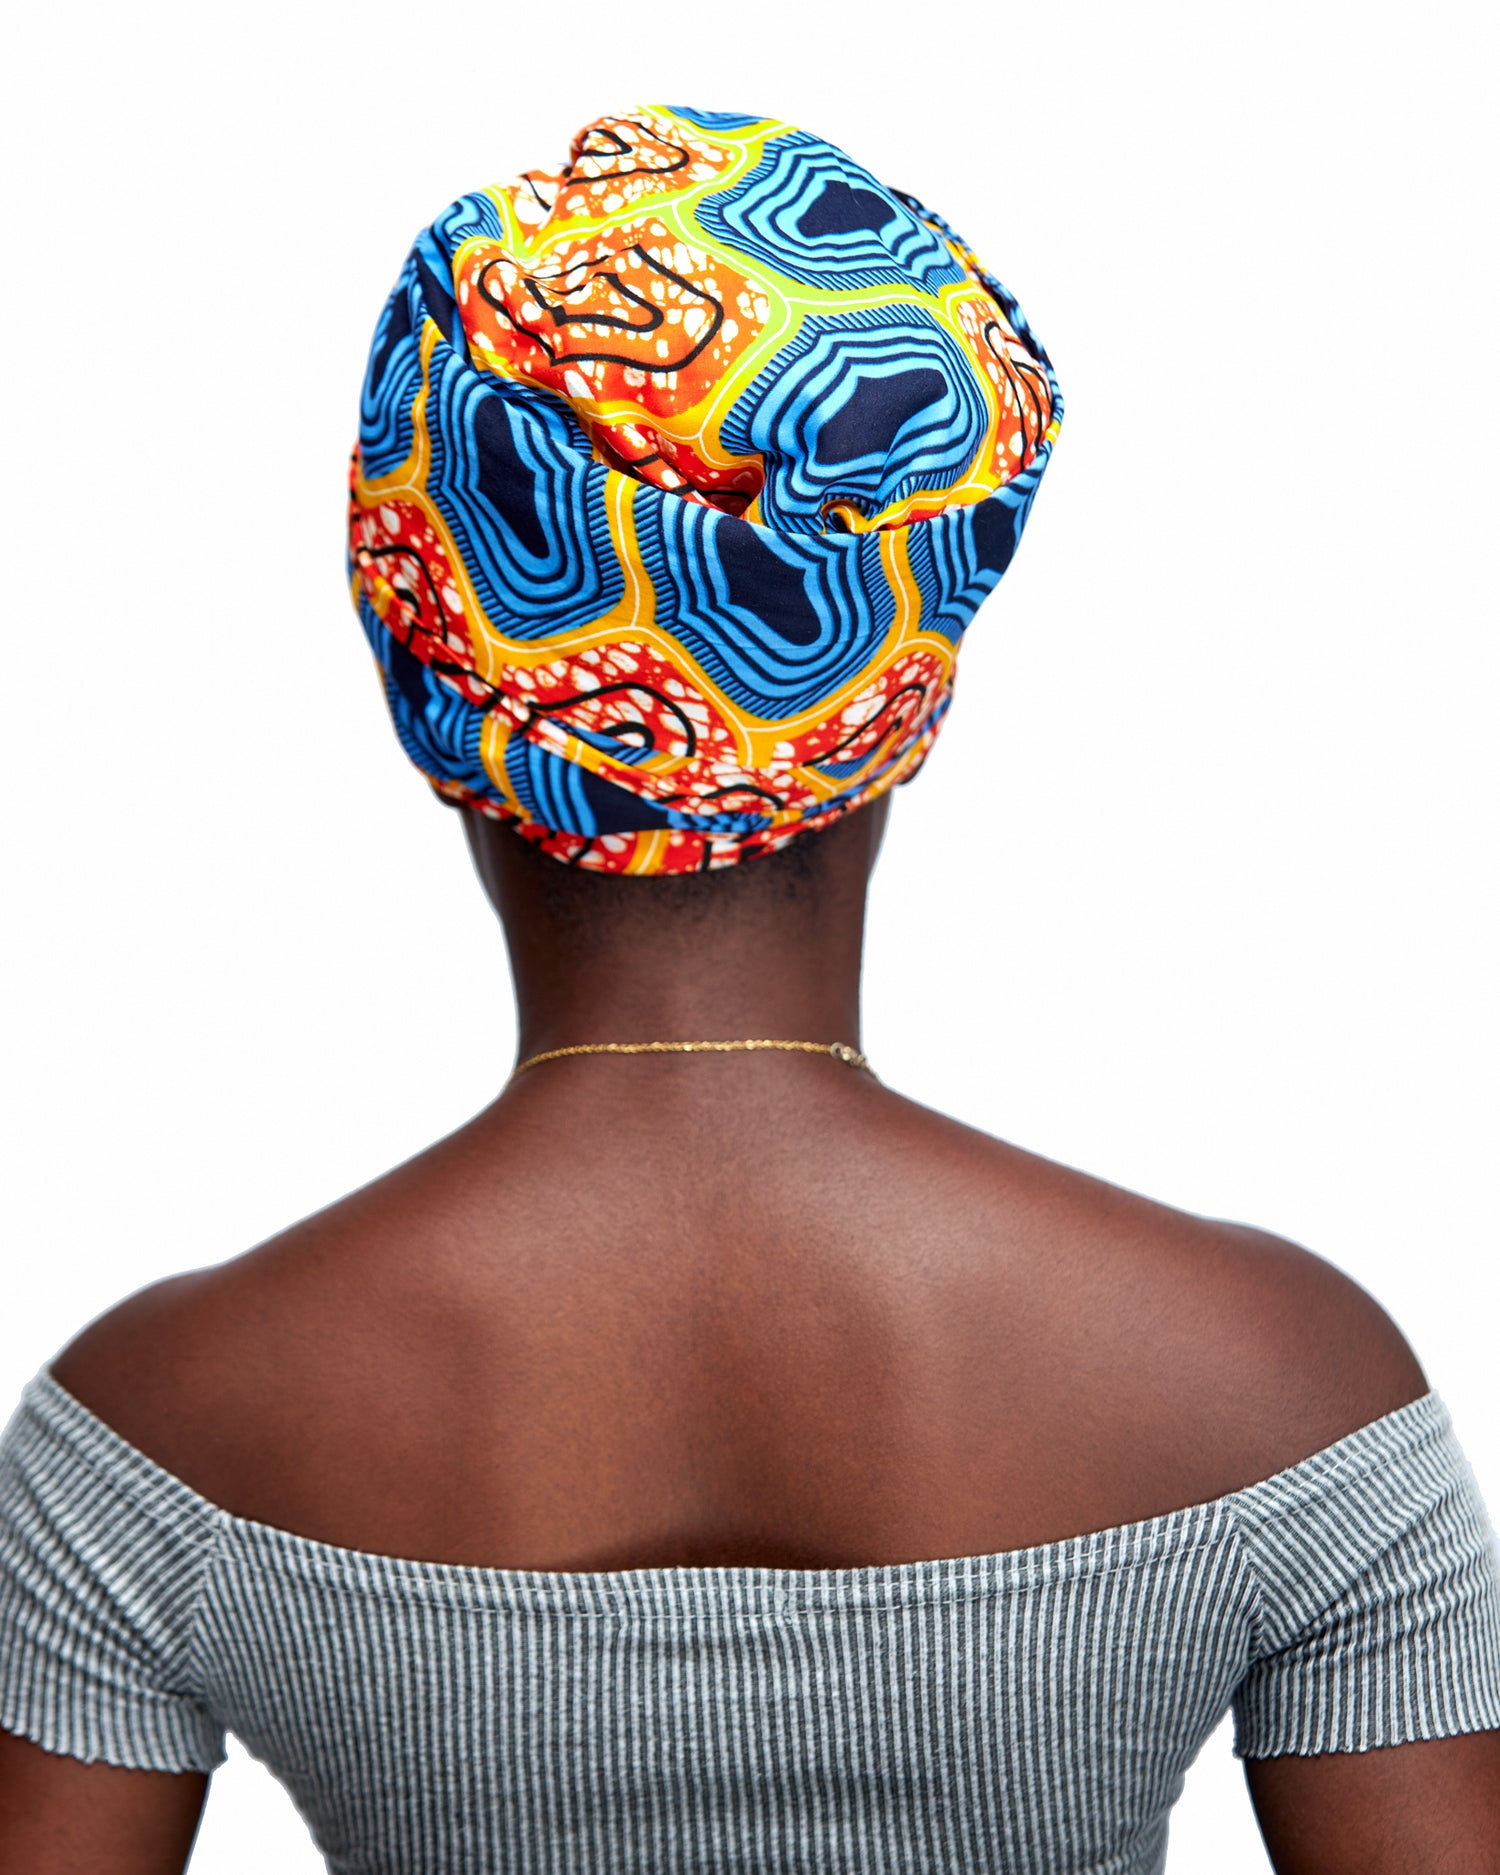 Ankara Wax Print Made of Seablue, Orange, Yellow, White And Black Blend of Beautiful Colours And Pattern, Hand Made Elastic Silklined Bonnet With Band